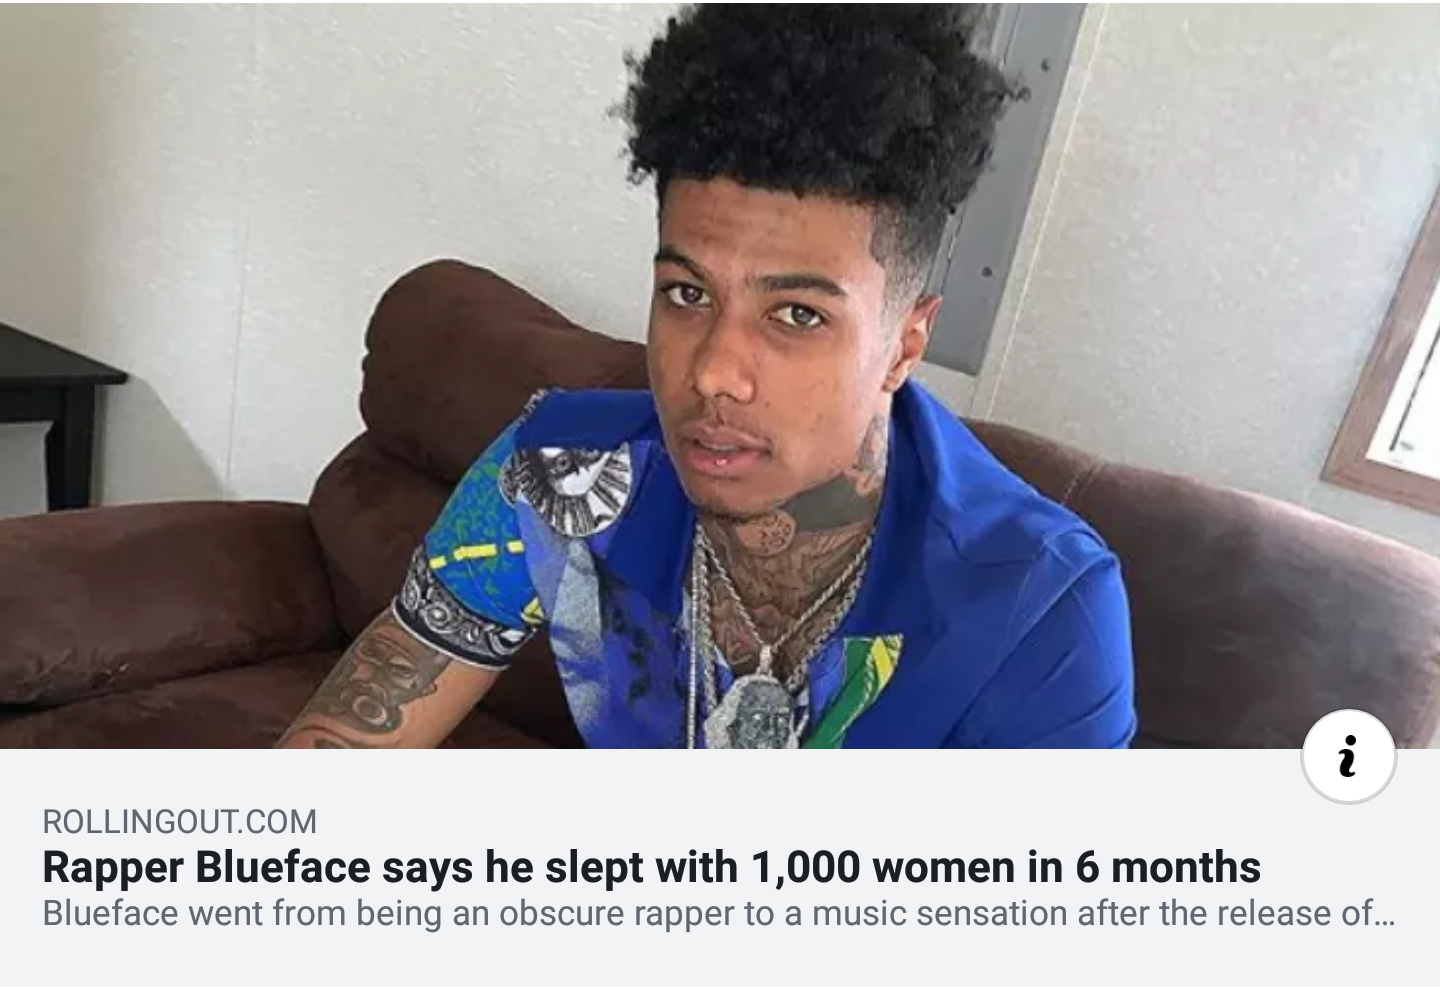 bluefacebleedem instagram - Rollingout.Com Rapper Blueface says he slept with 1,000 women in 6 months Blueface went from being an obscure rapper to a music sensation after the release of...